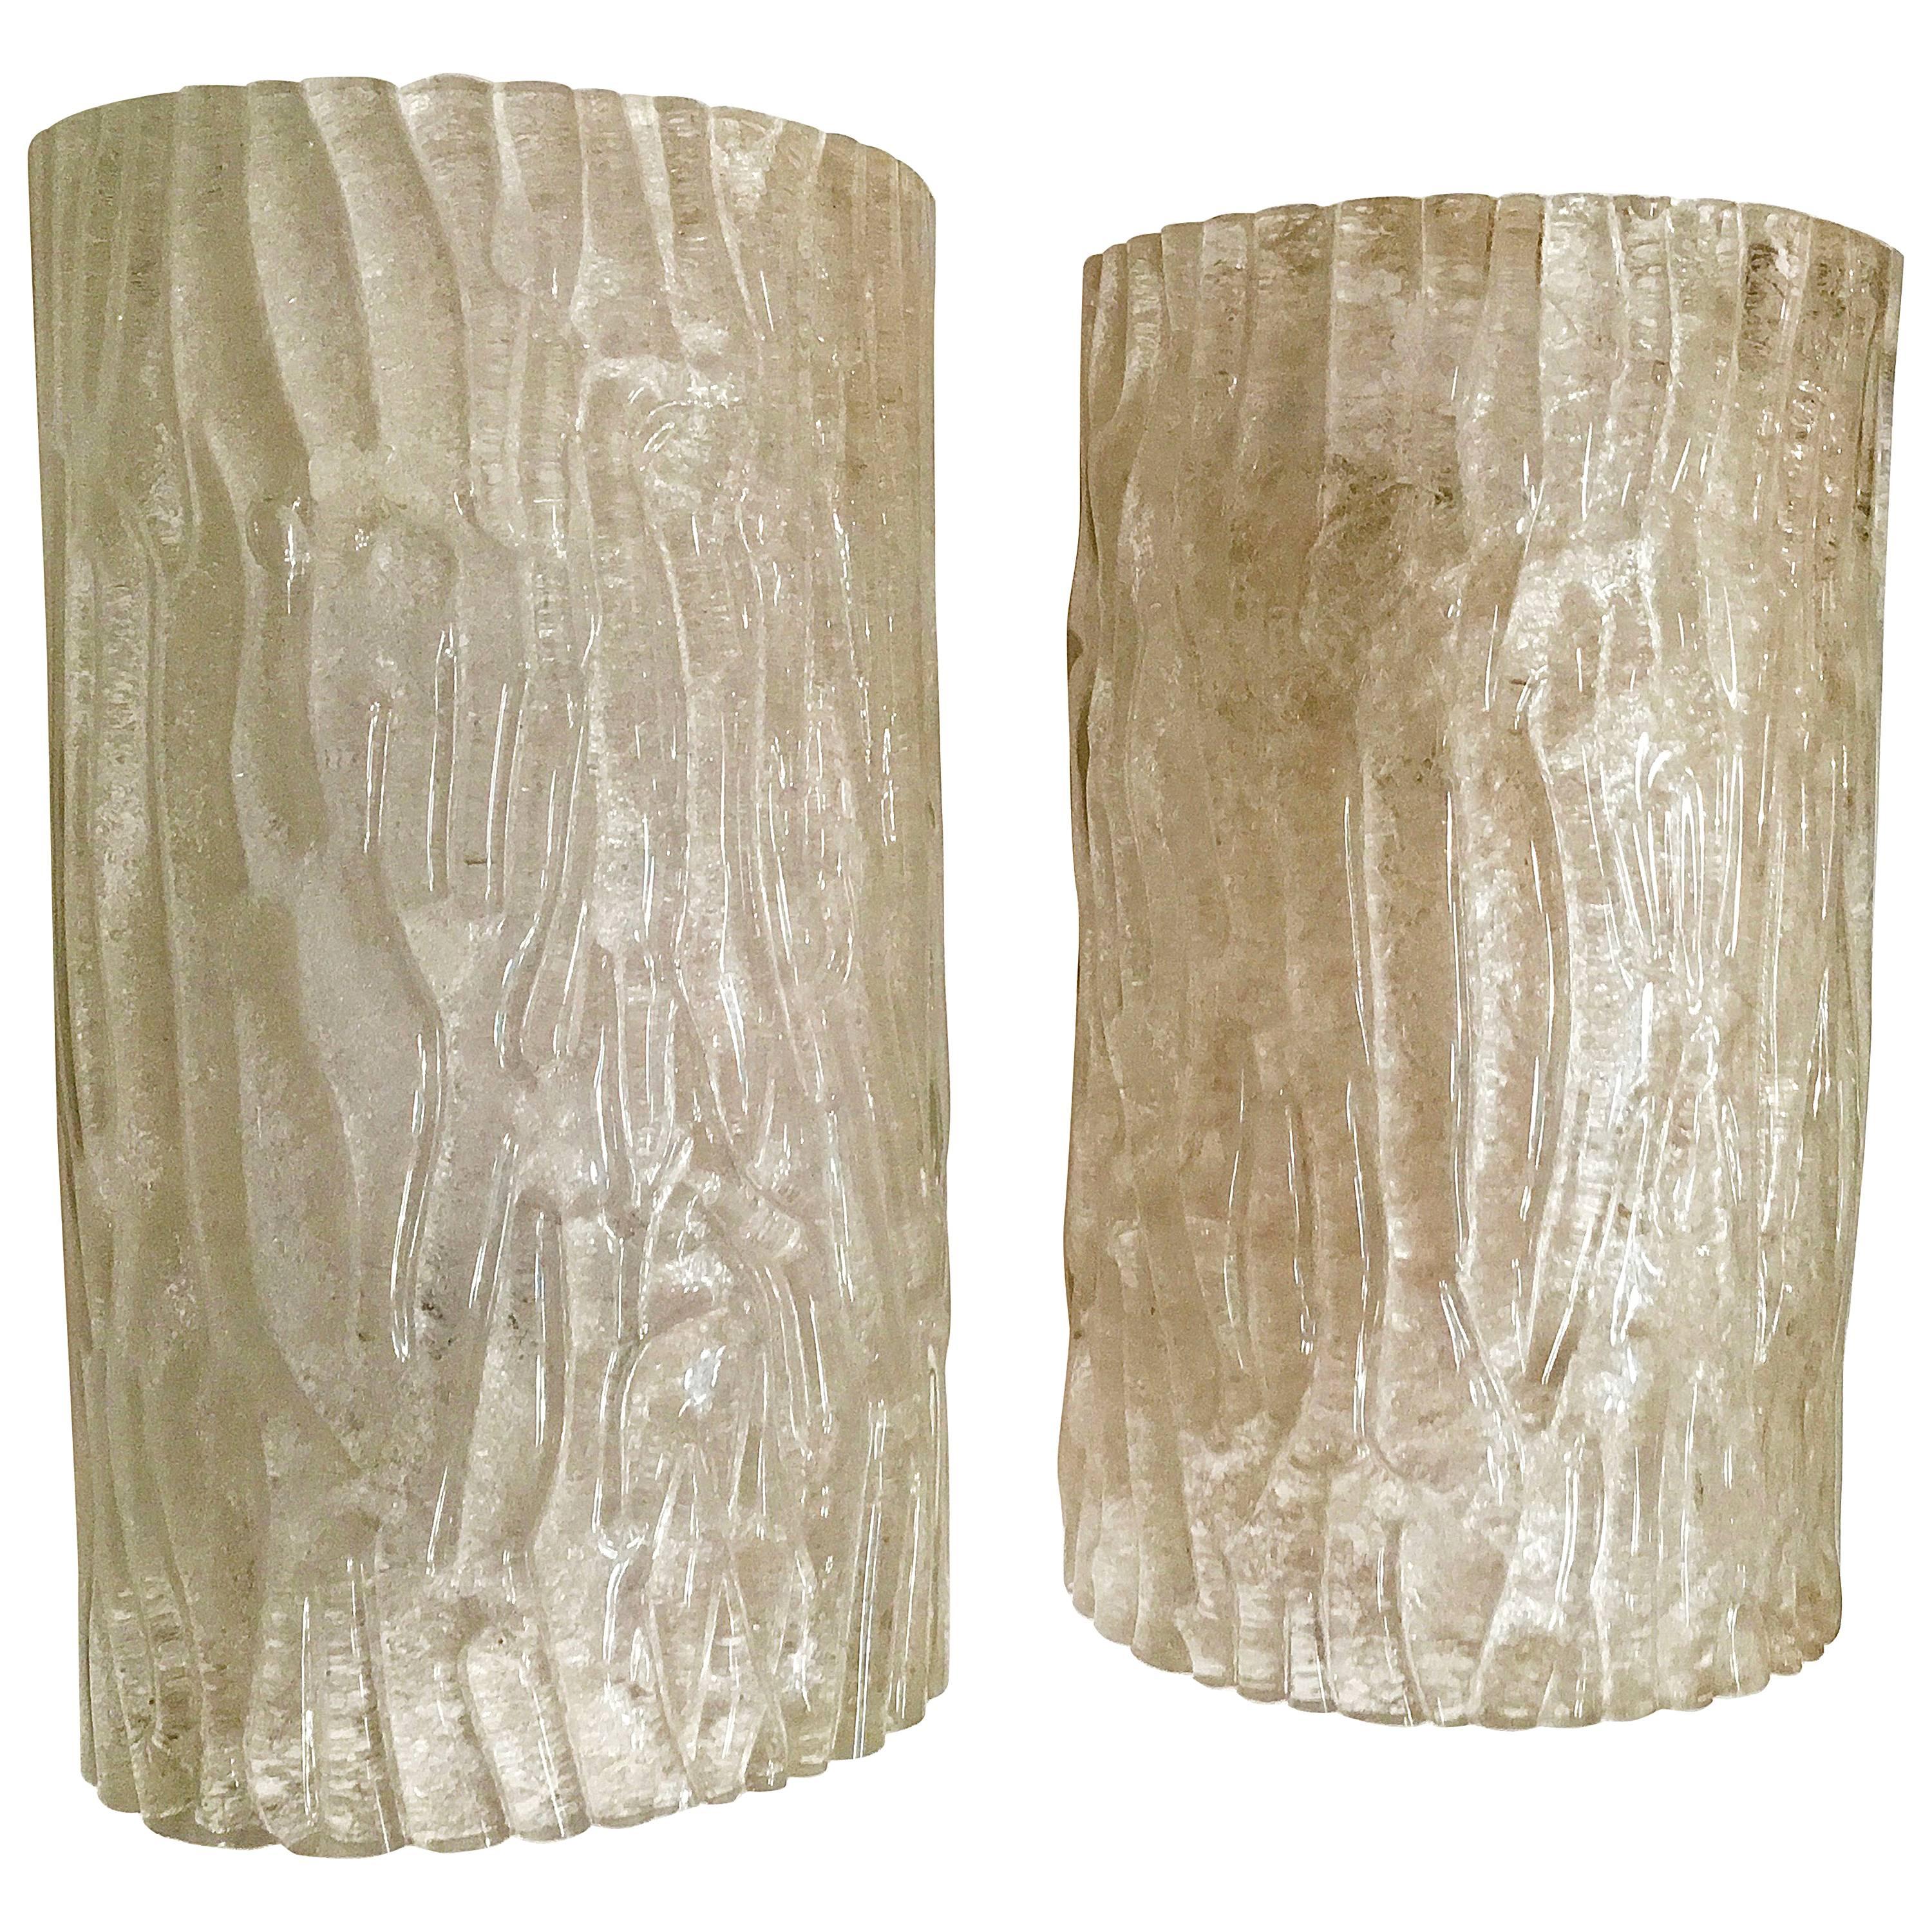 Mid-Century Modern Pair of Sconces or Wall Lights by Barovier & Toso, 1970